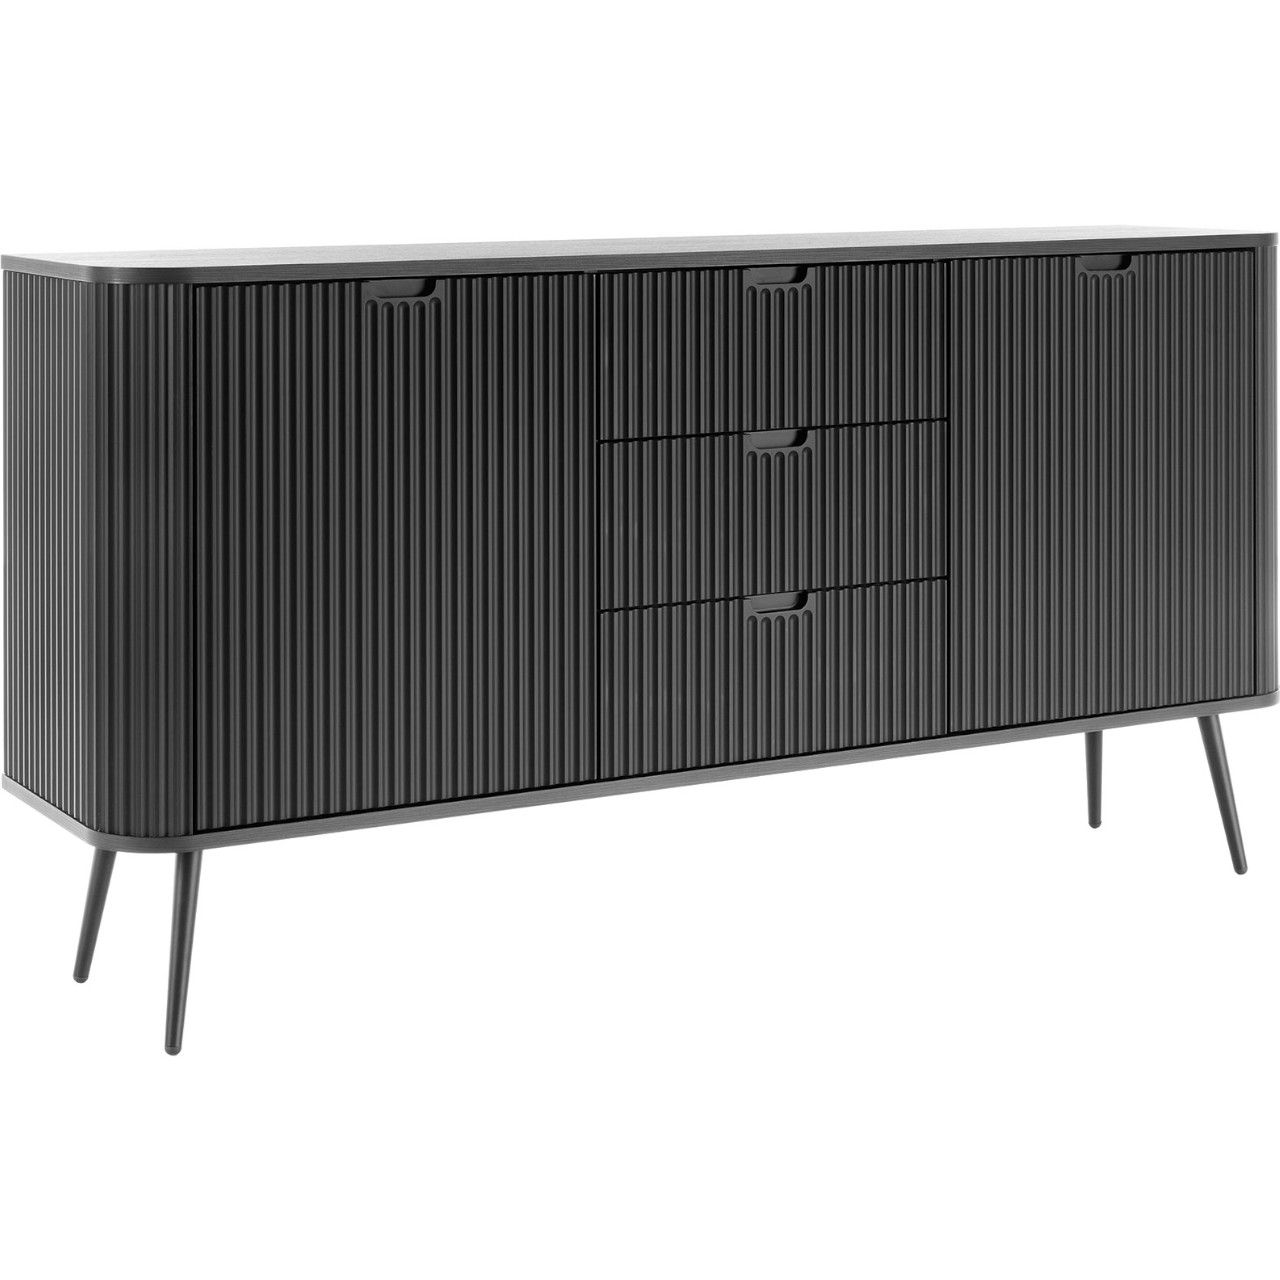 Chest of drawers ZOVI 02 black